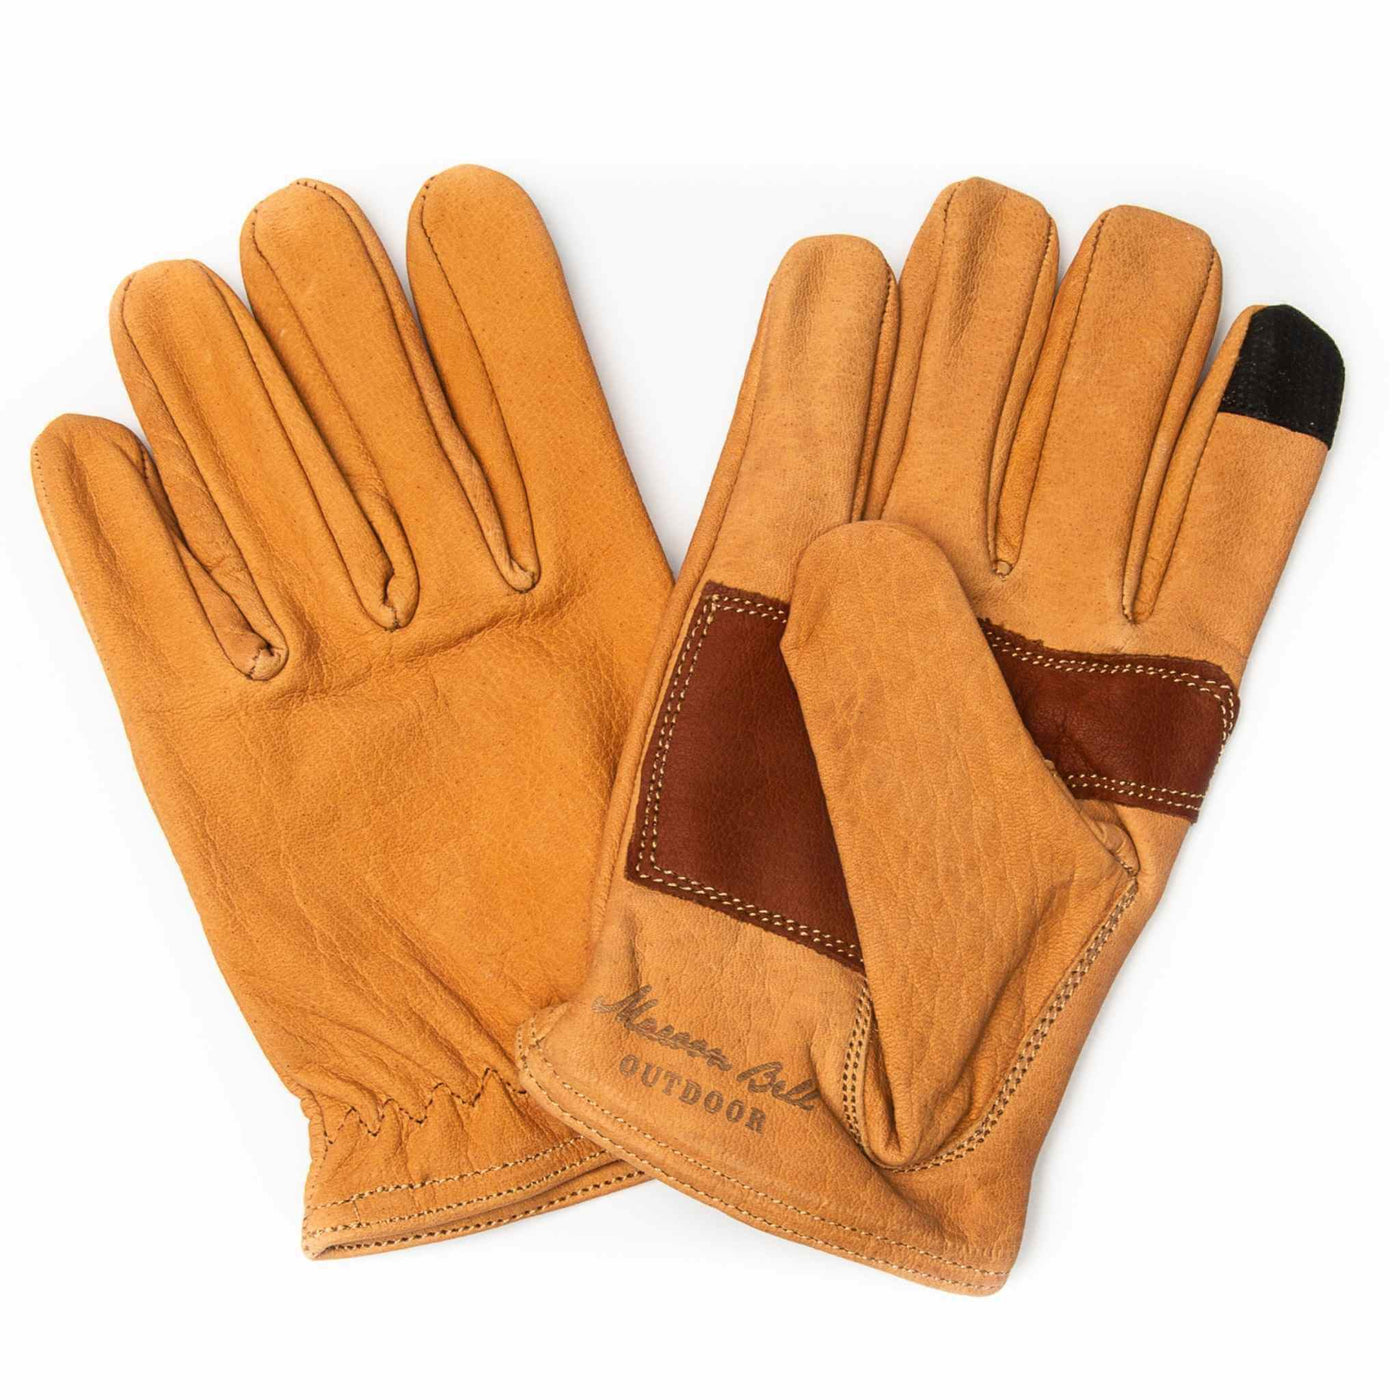 A pair of buffalo leather ranching gloves from Maroon Bell Outdoor, which feature reinforced palms and a smart finger on the index.